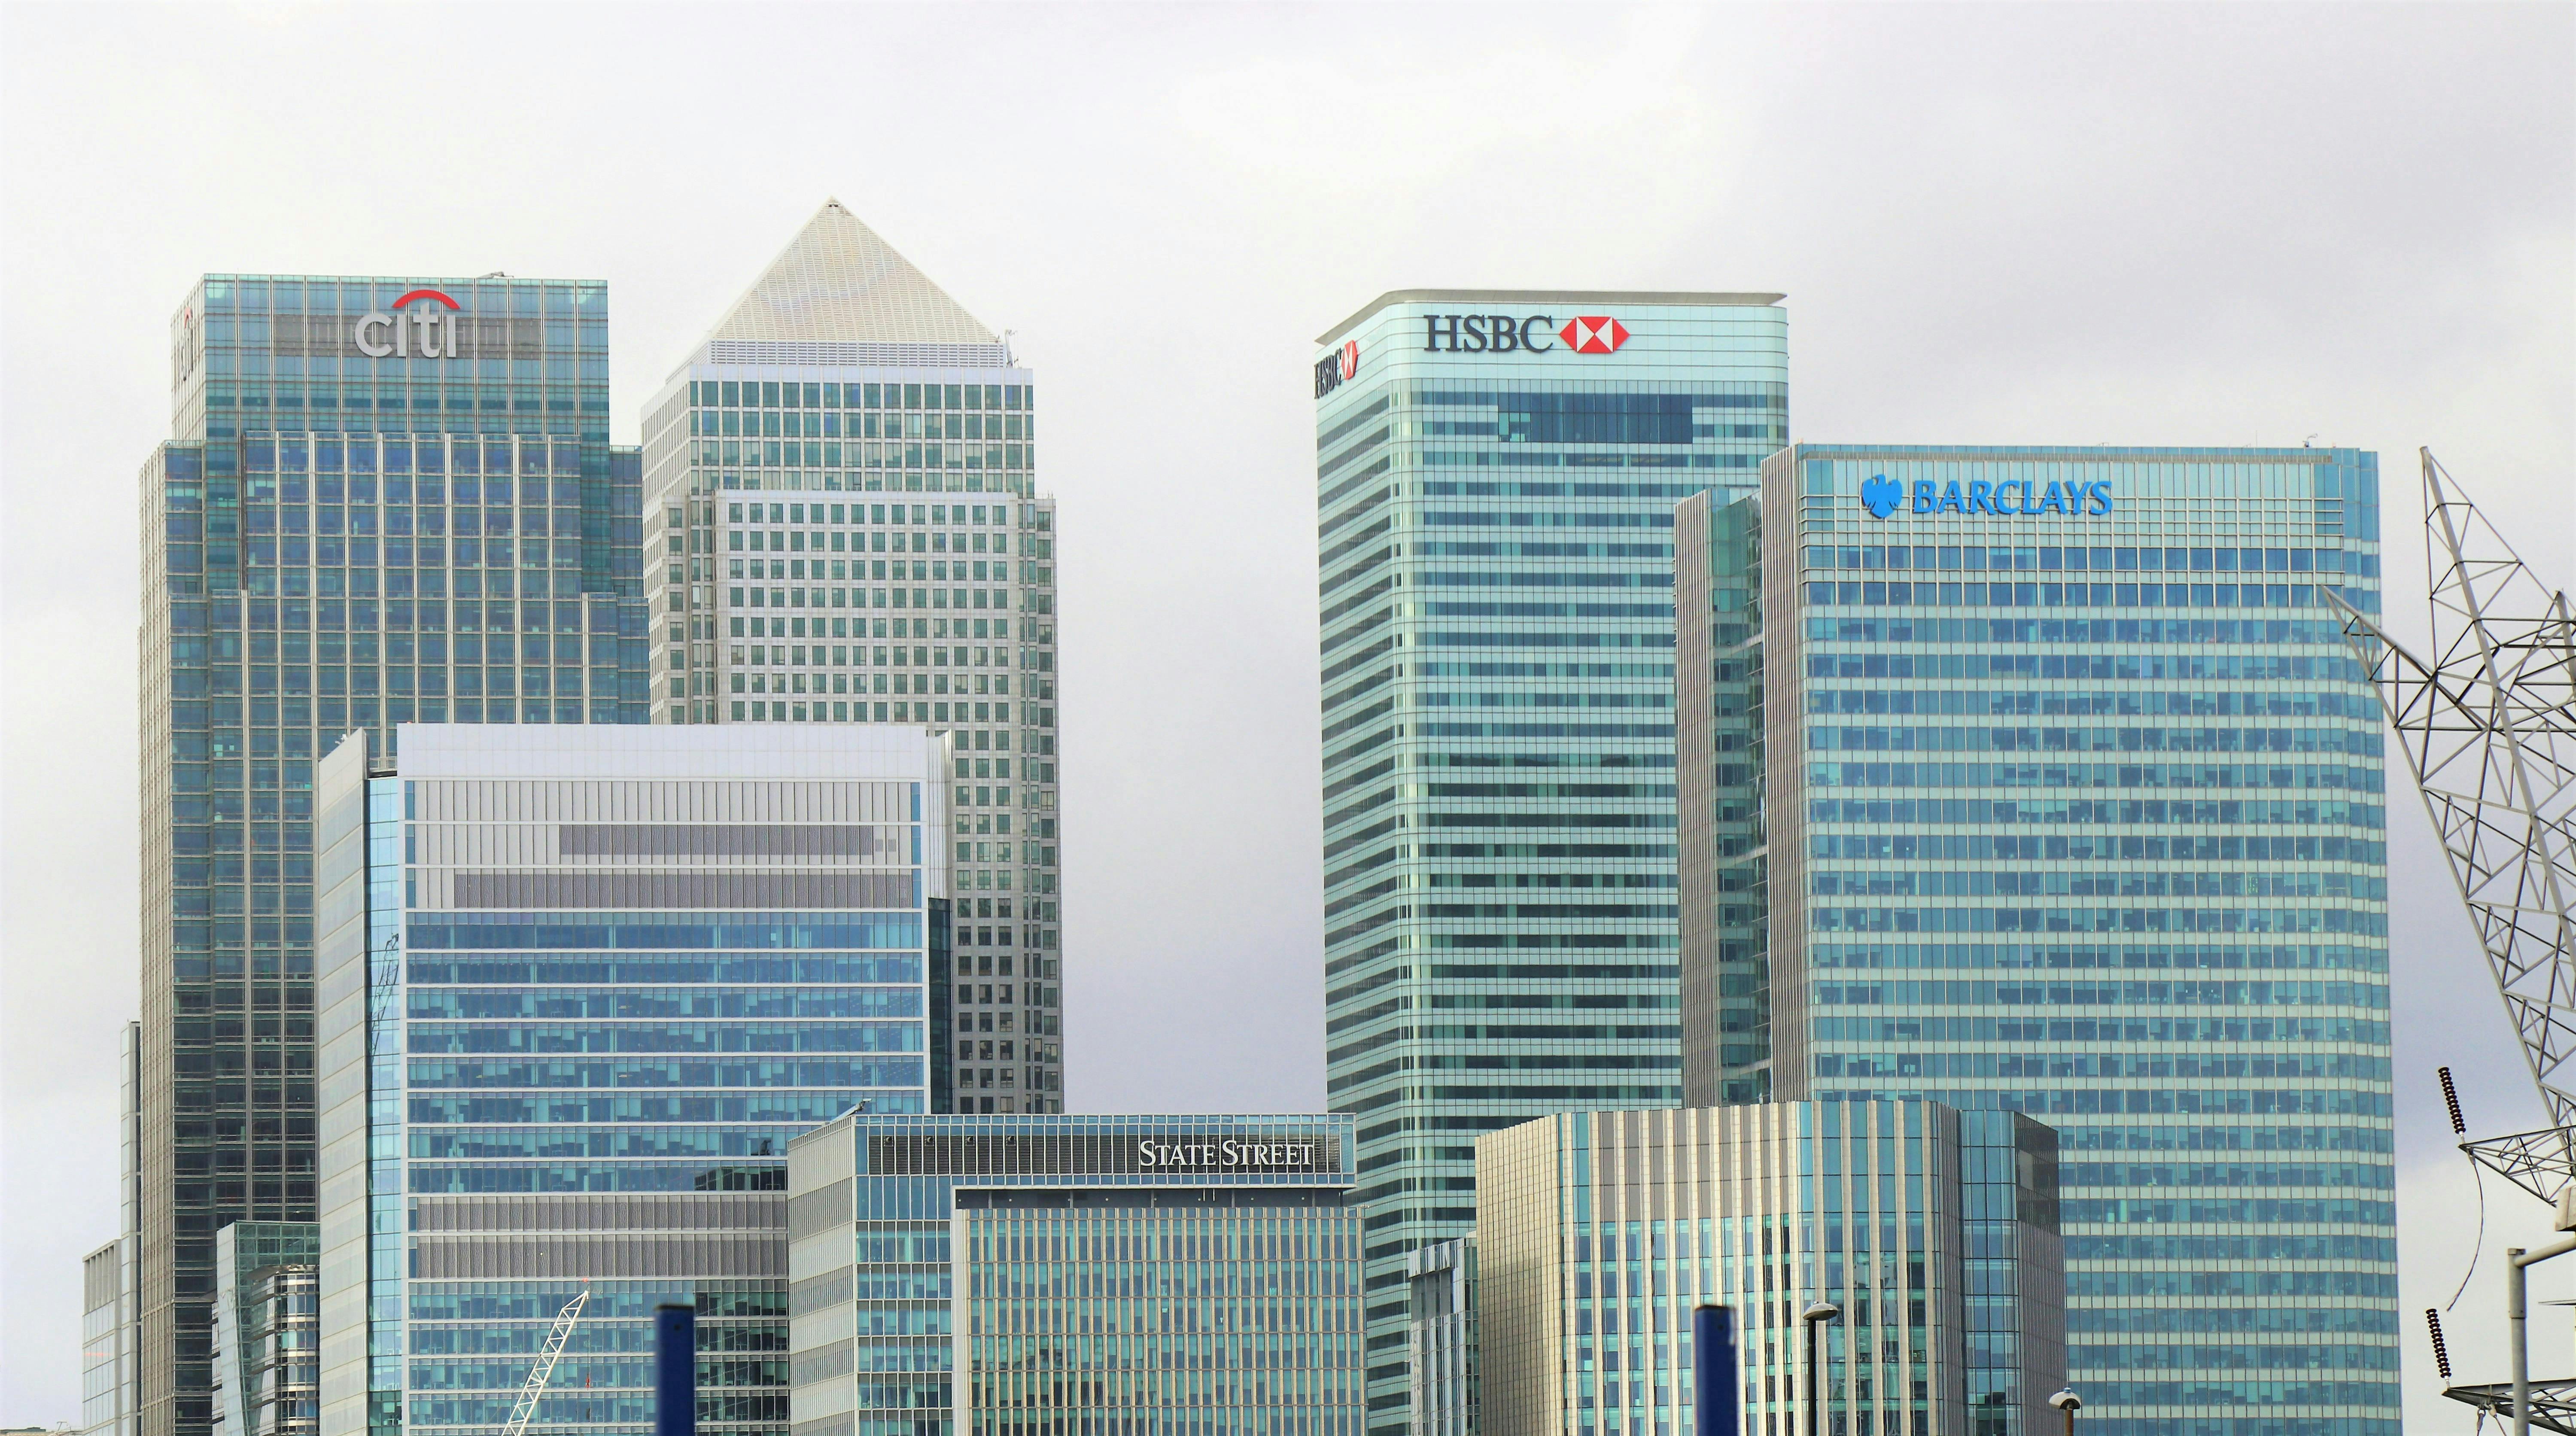 Canary Wharf banks including HSBC and Barclays